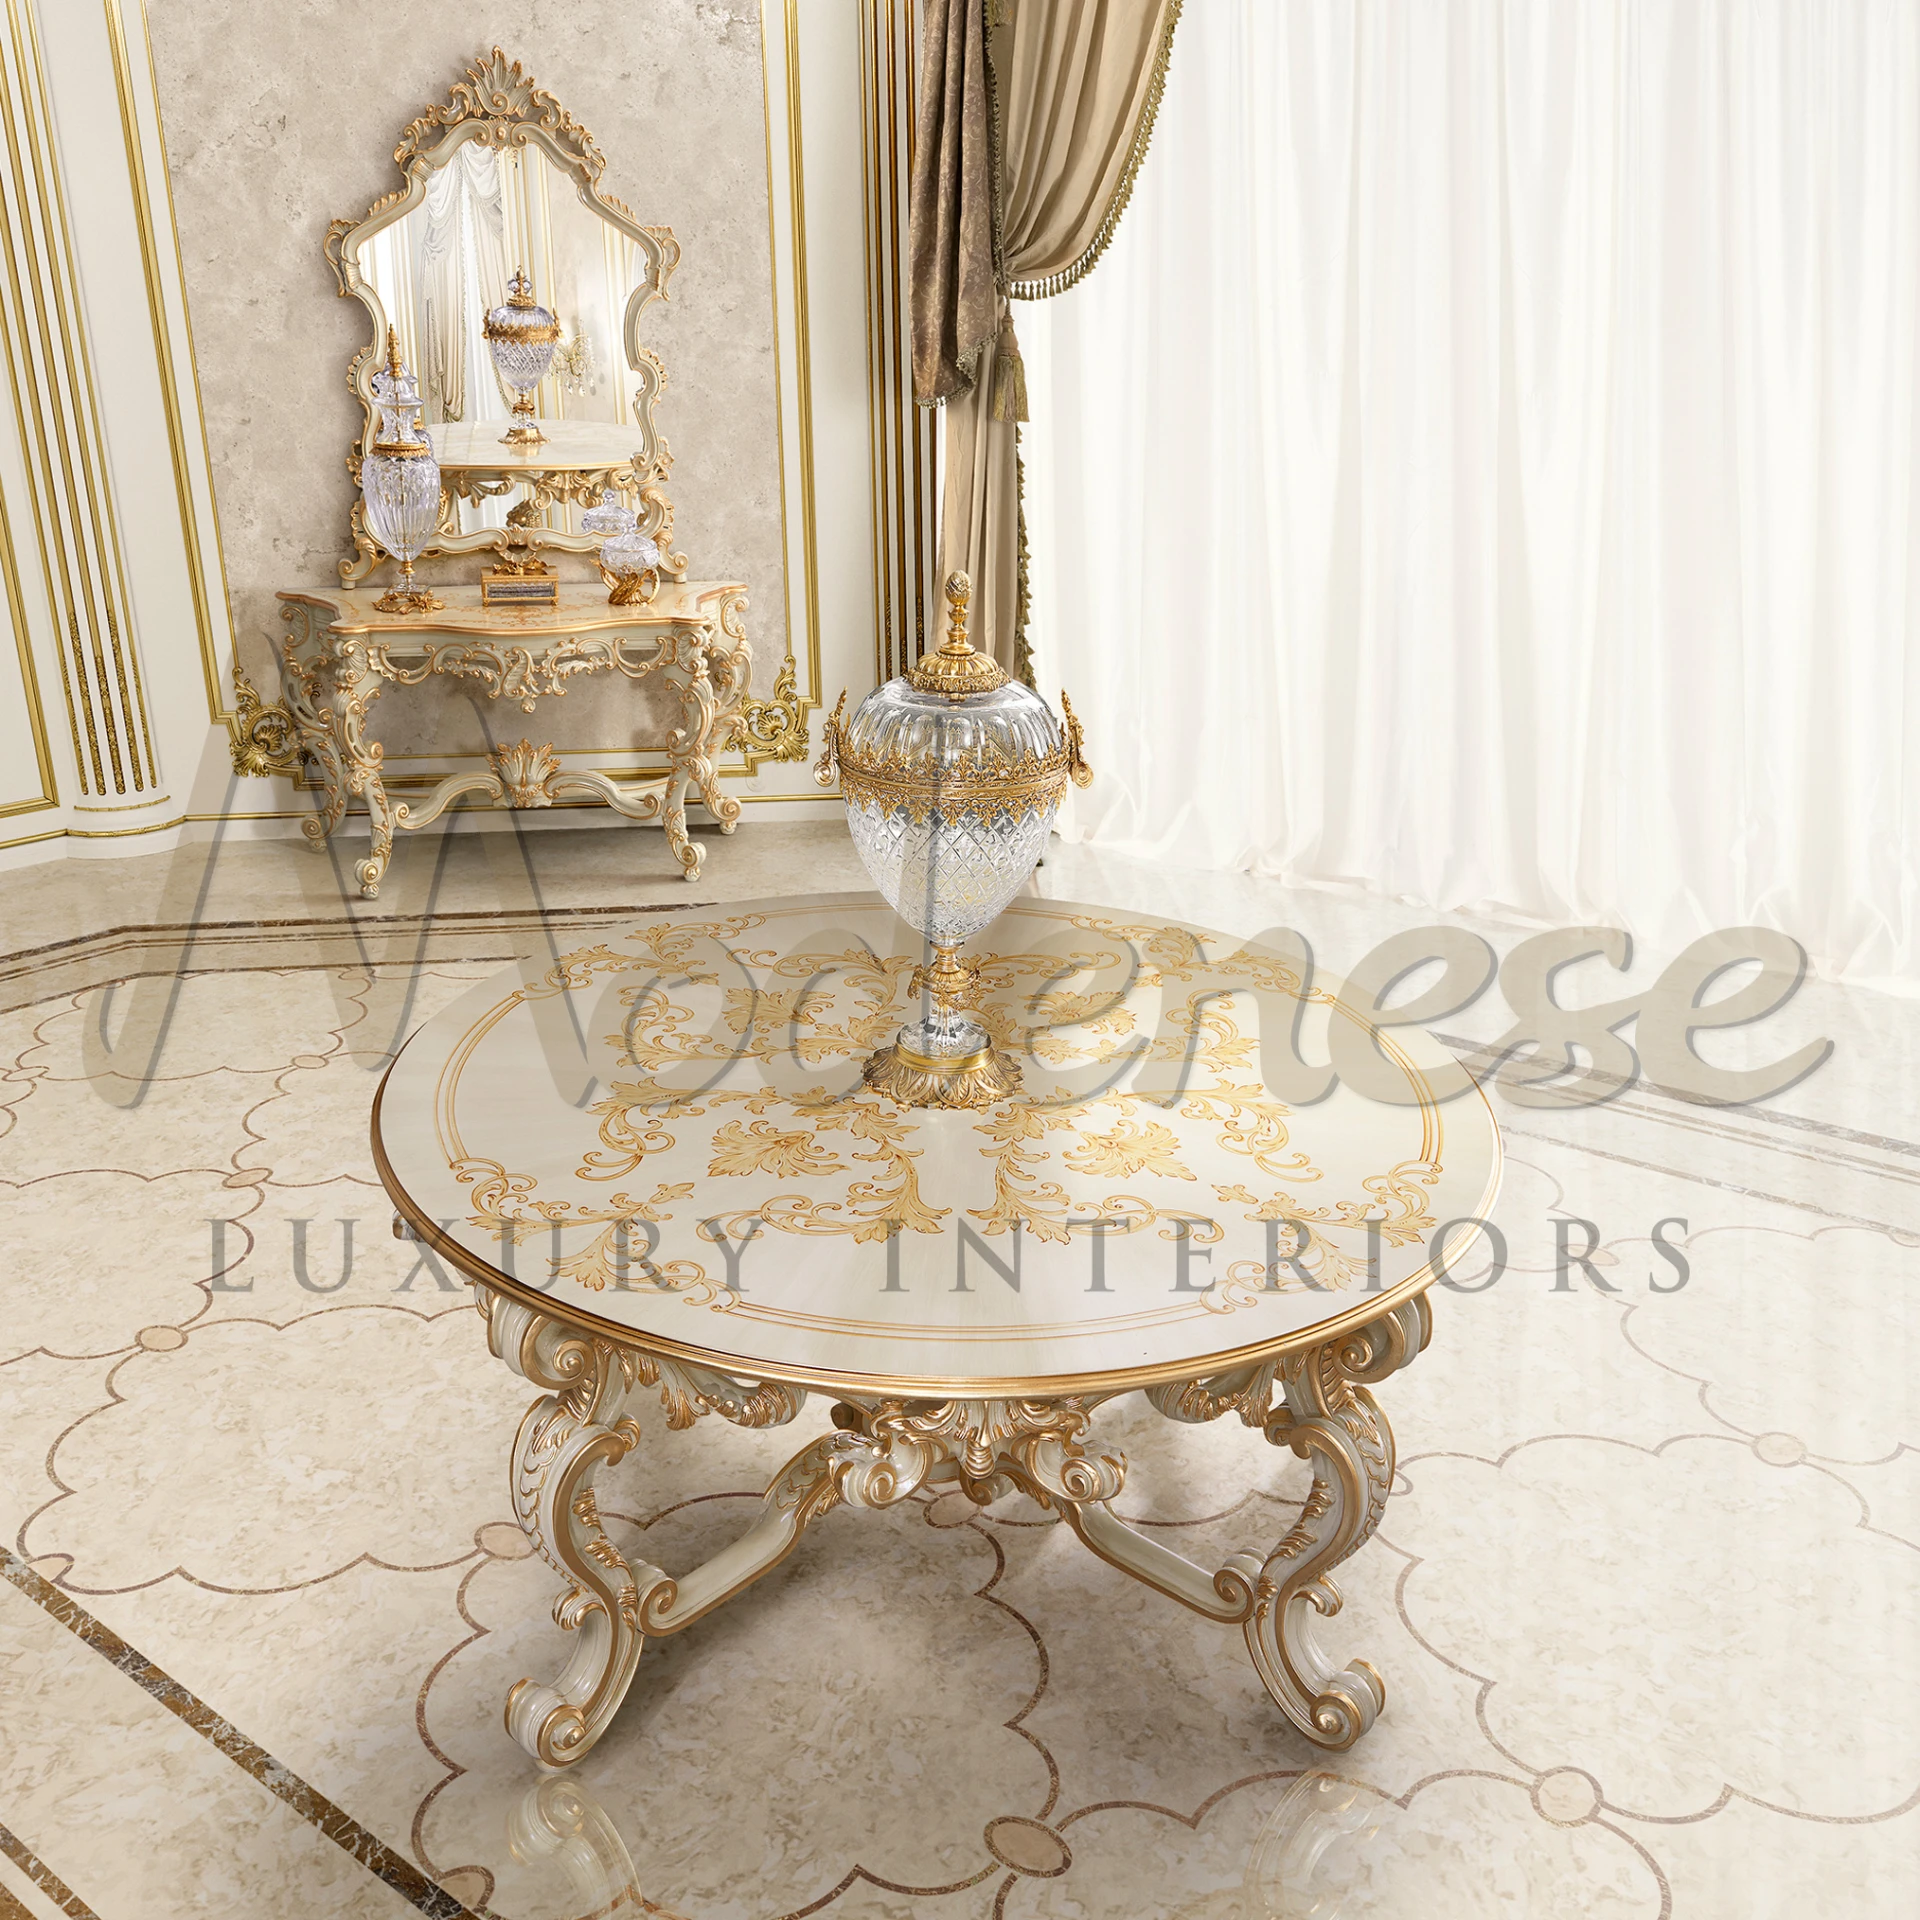 Handcrafted Figured Mirror from Italy enhances any interior with its unique baroque and classic style.